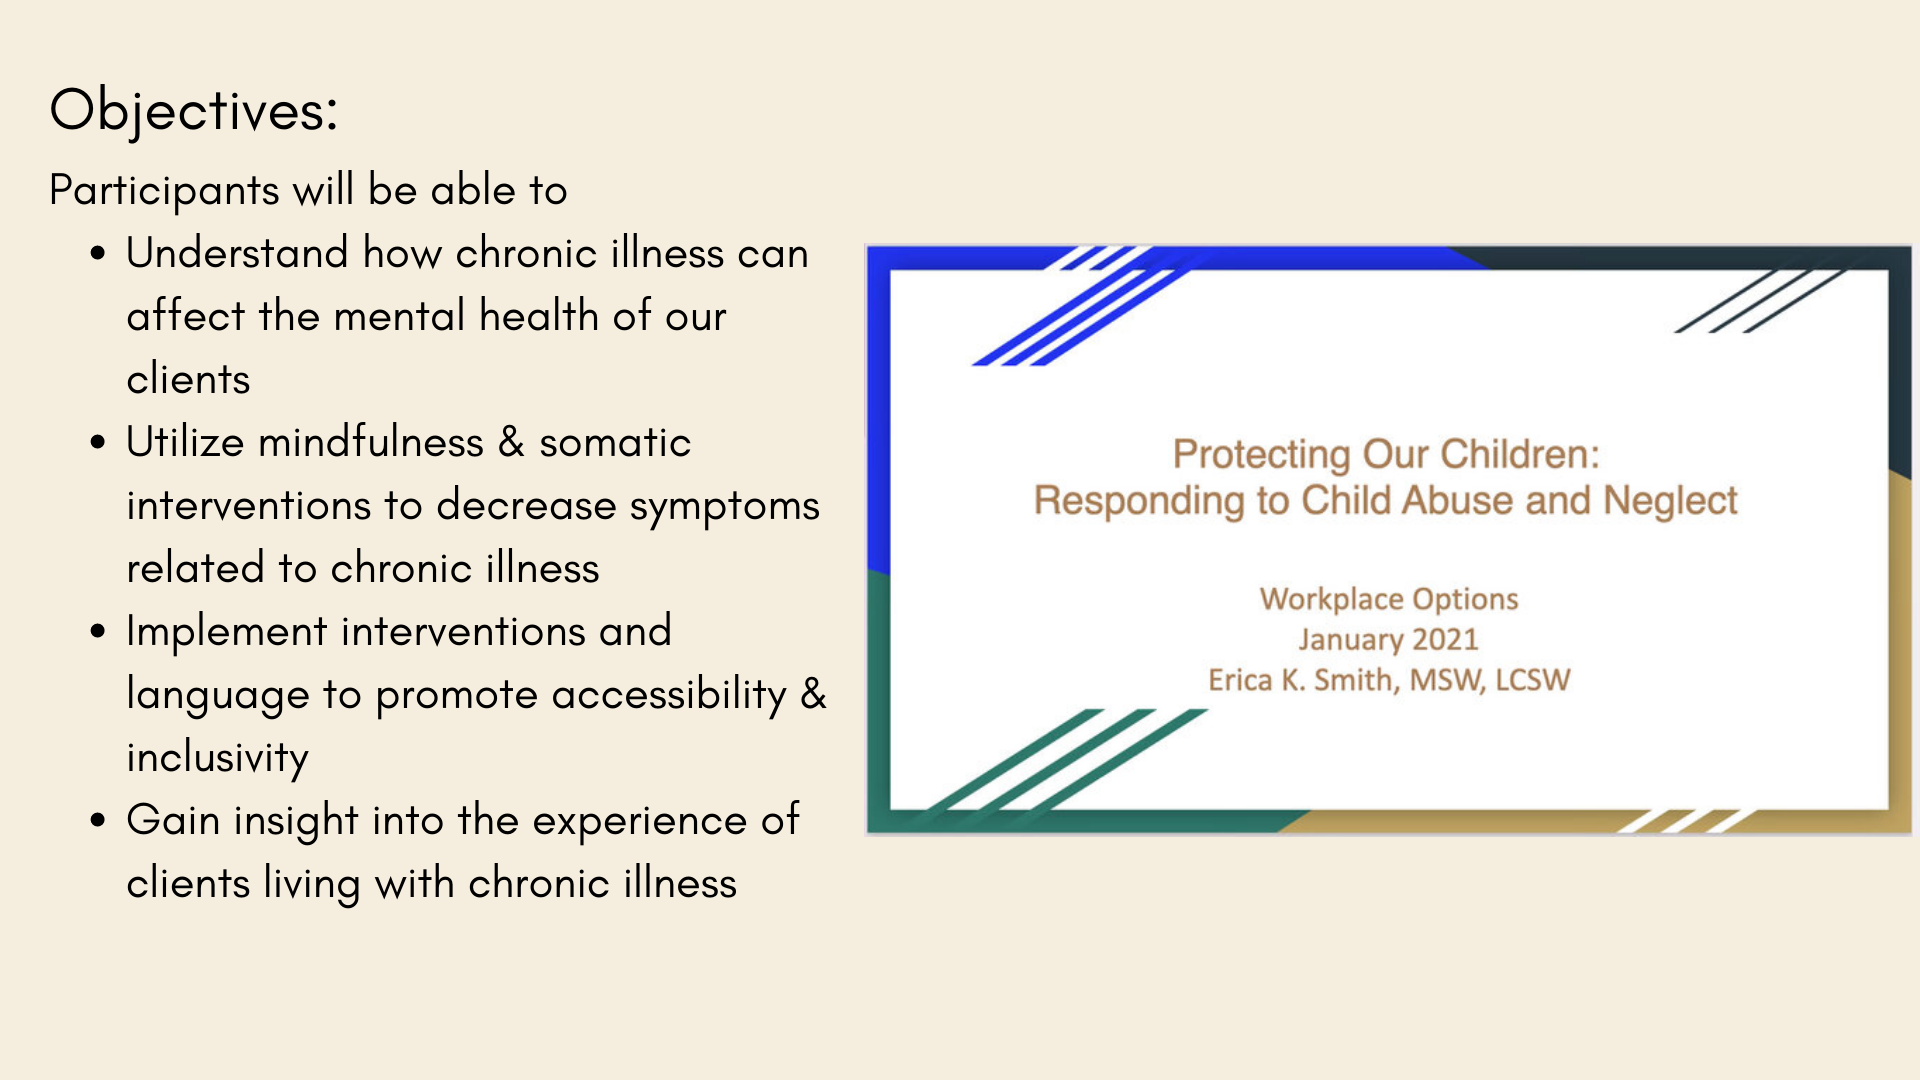 Responding to Child Abuse &amp; Neglect